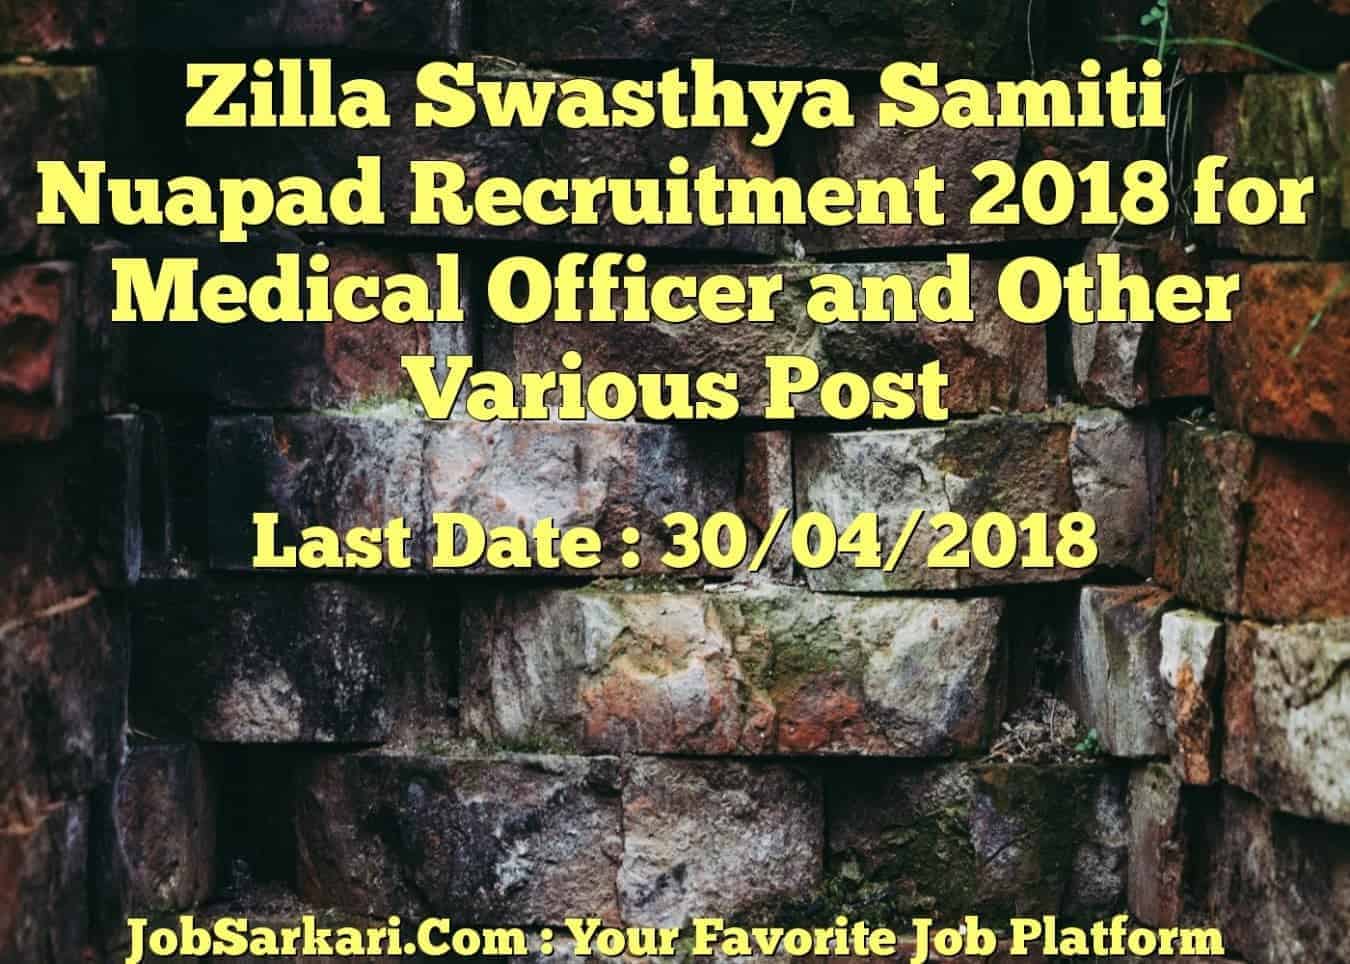 Zilla Swasthya Samiti Nuapad Recruitment 2018 for Medical Officer and Other Various Post